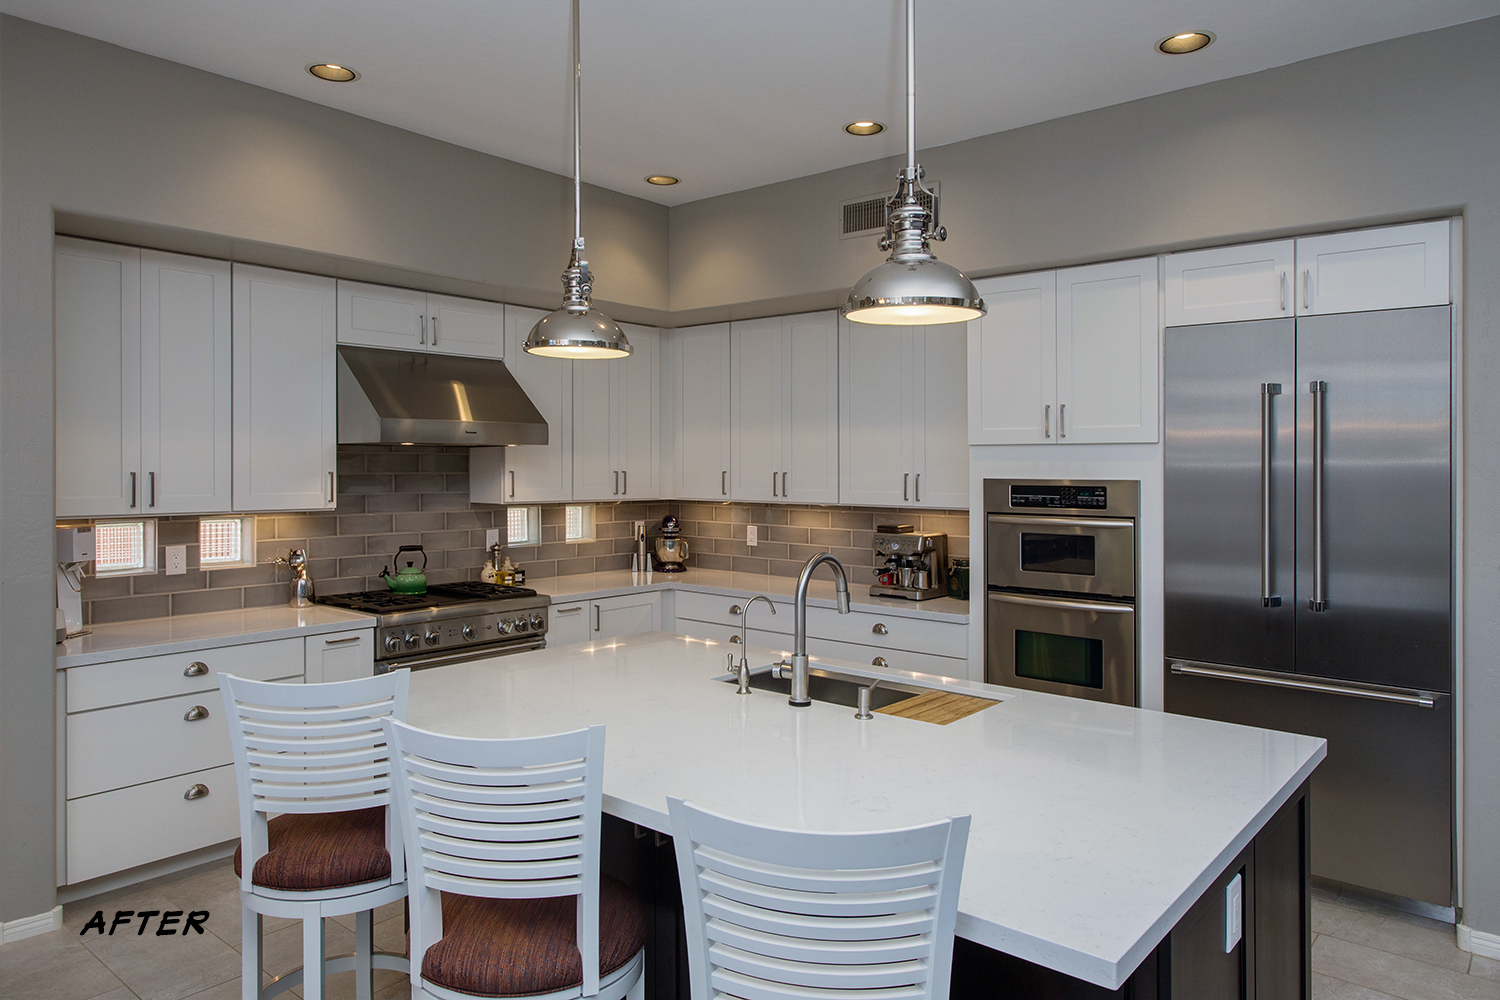 Phoenix kitchen remodel contractor hochuli design and remodeling teamS